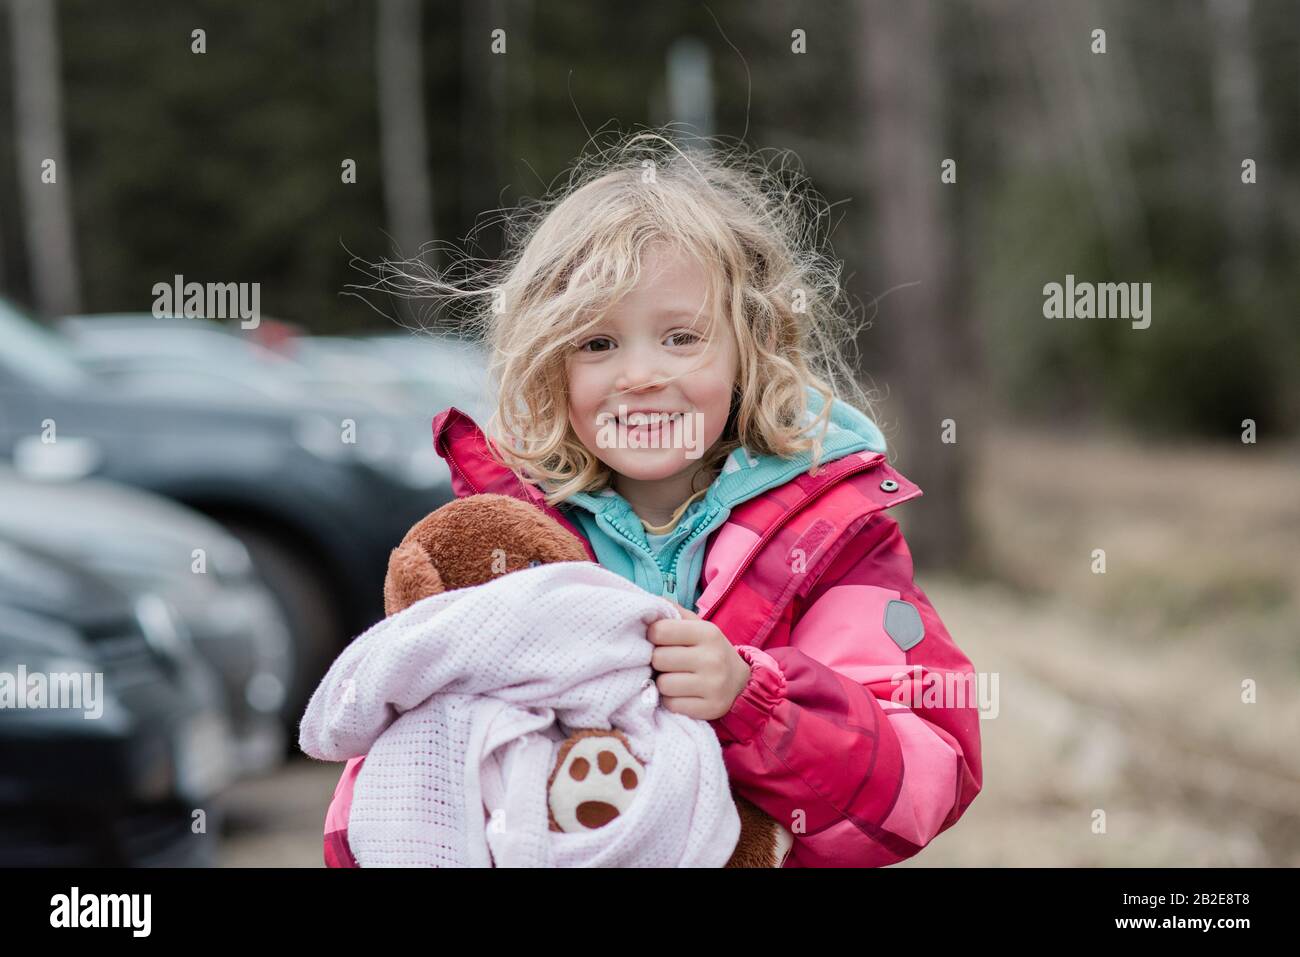 candid portrait of a young girl smiling with messy hair Stock Photo